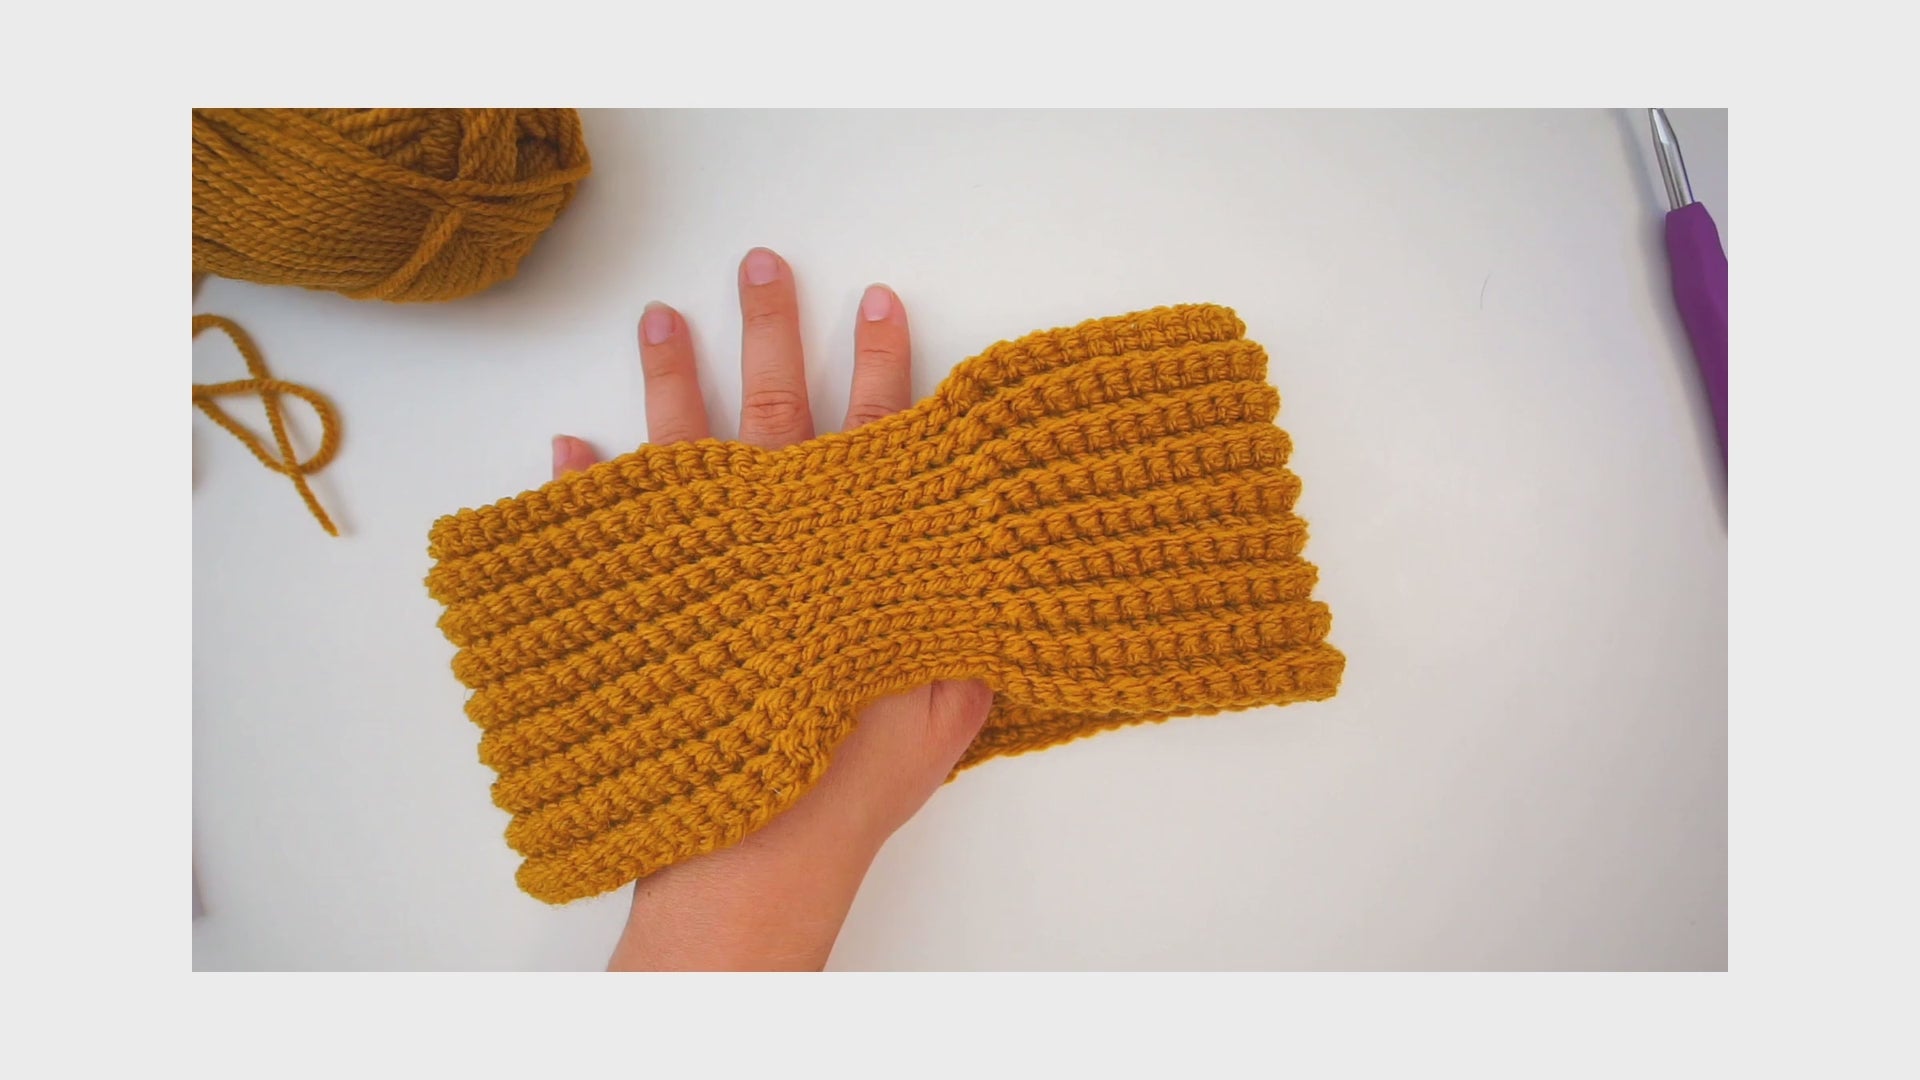 Learn to crochet a cozy headband with our easy-to-follow video tutorial